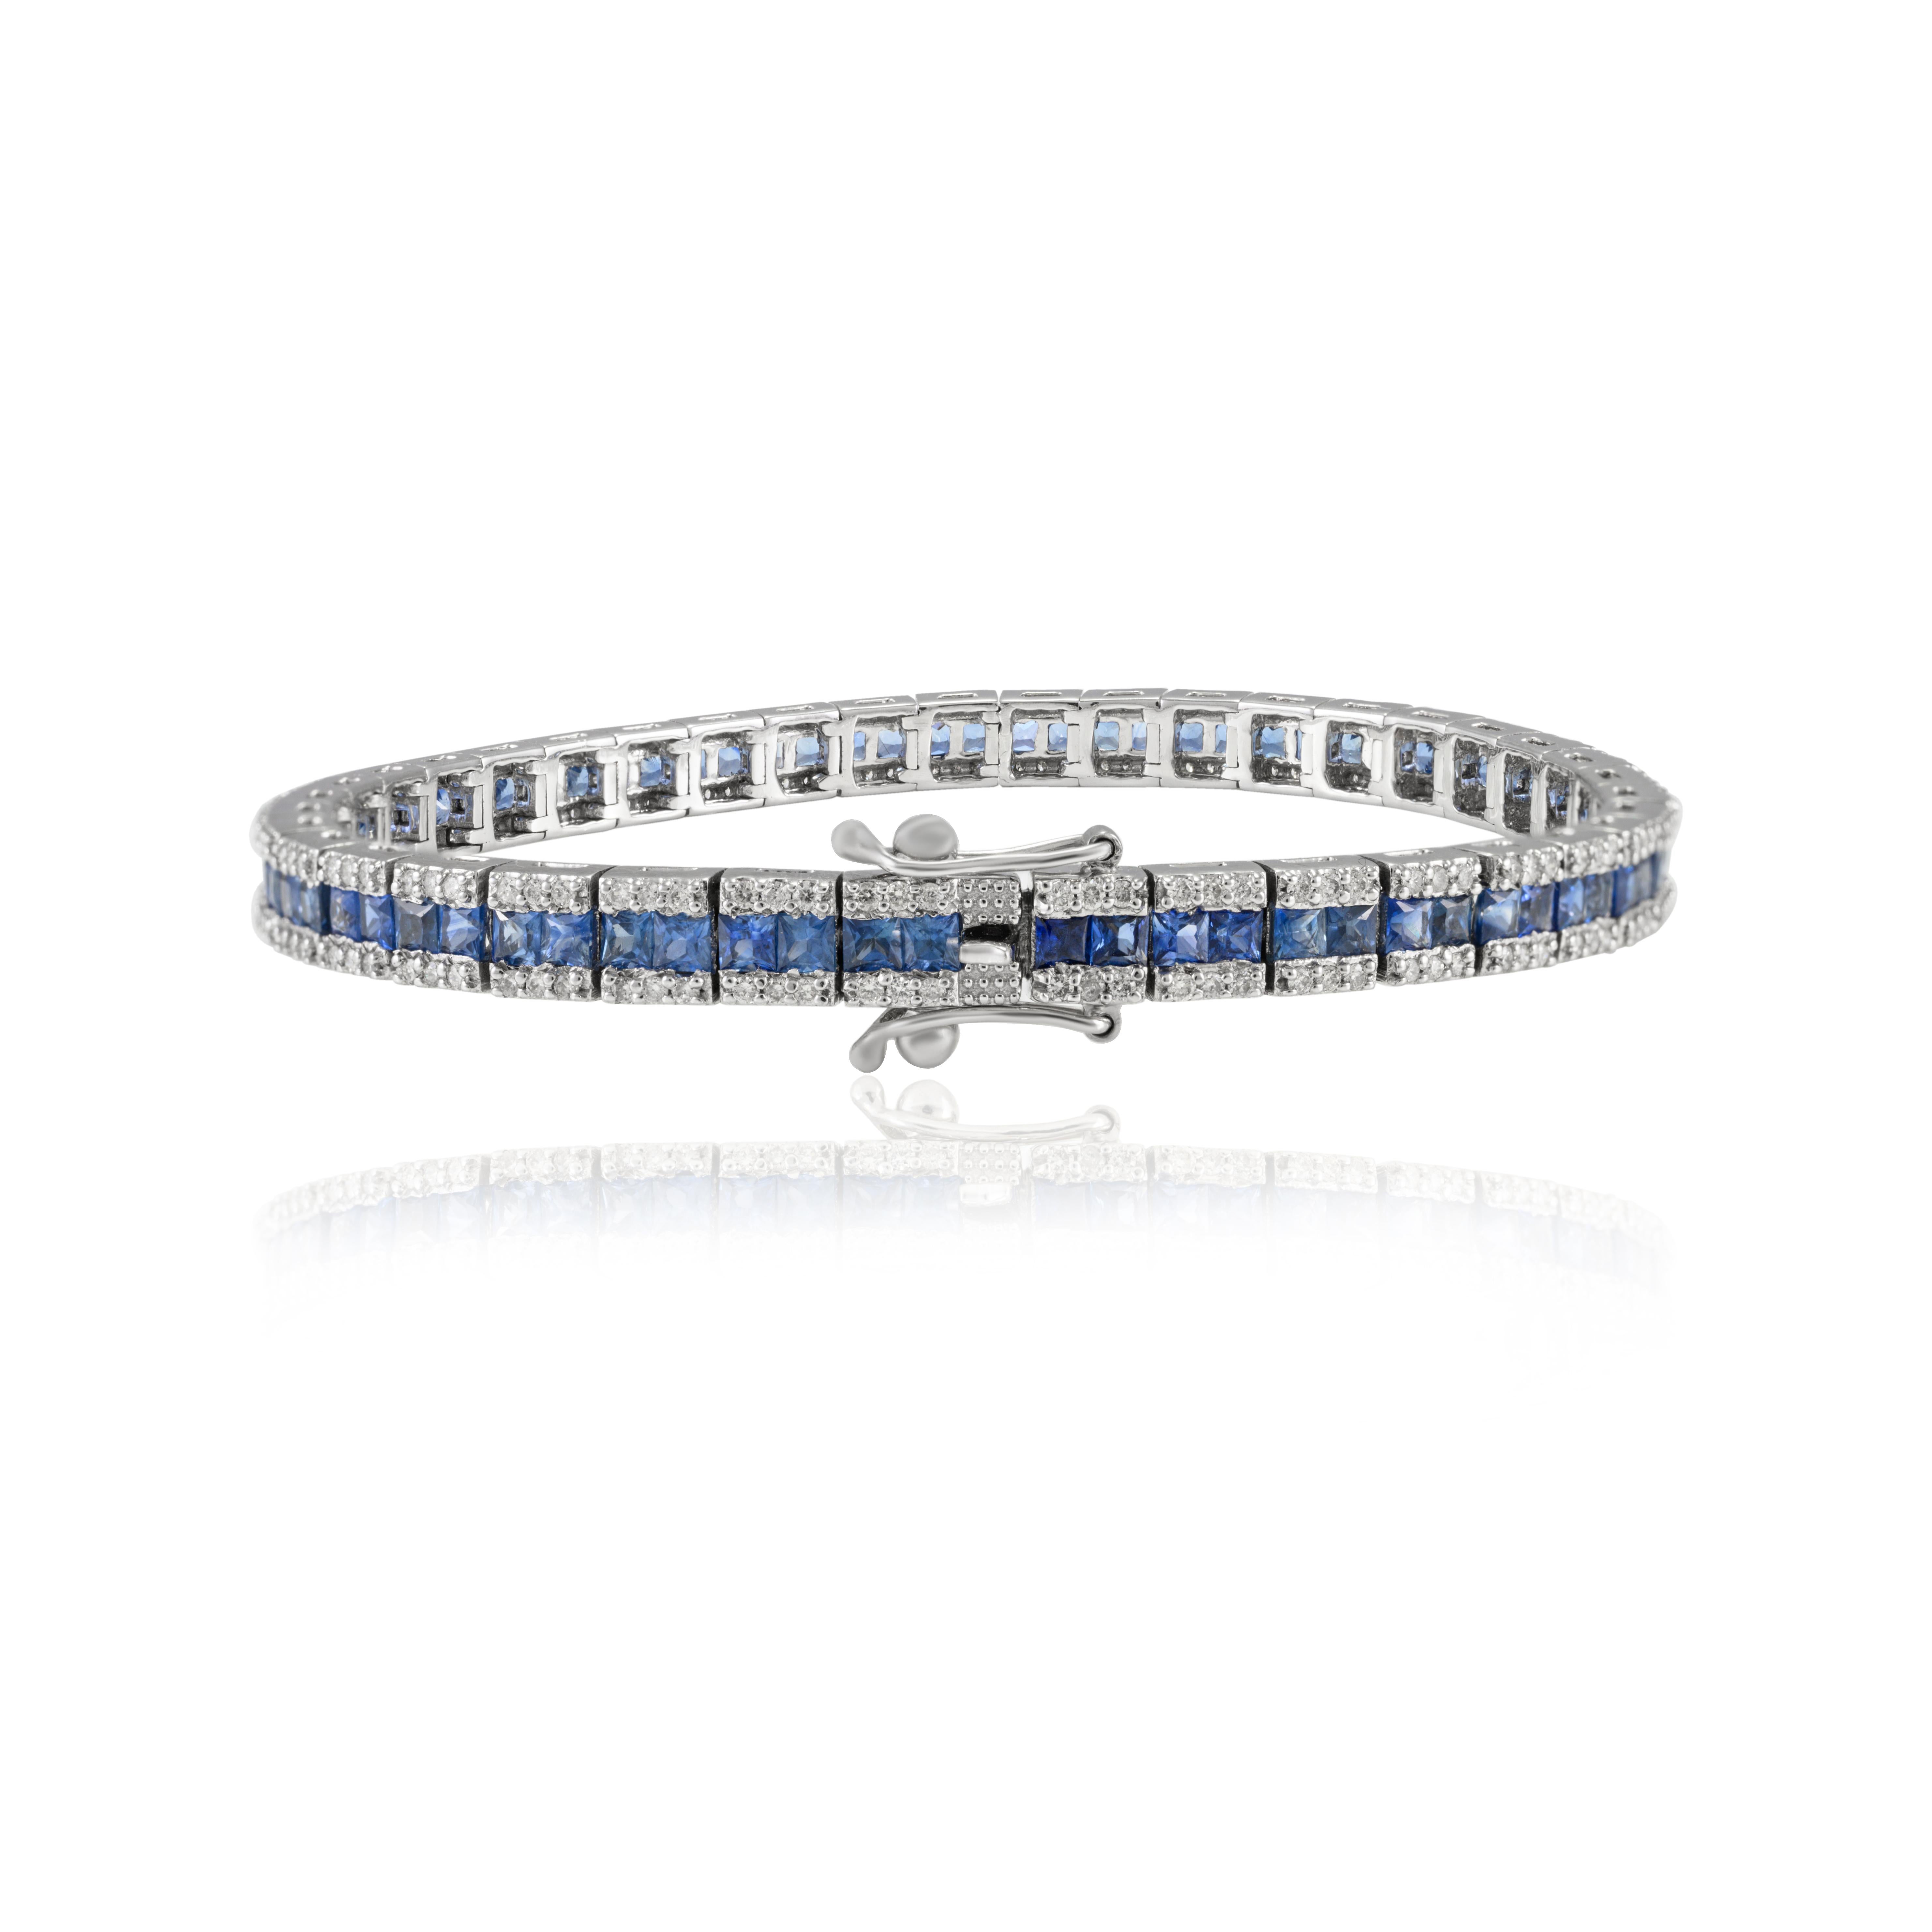 This French Cut Blue Sapphire Diamond Tennis Bracelet in 18K gold showcases endlessly sparkling natural blue sapphire and diamonds. It measures 7 inches long in length. 
Sapphire stimulates concentration and reduces stress. 
Designed with perfect